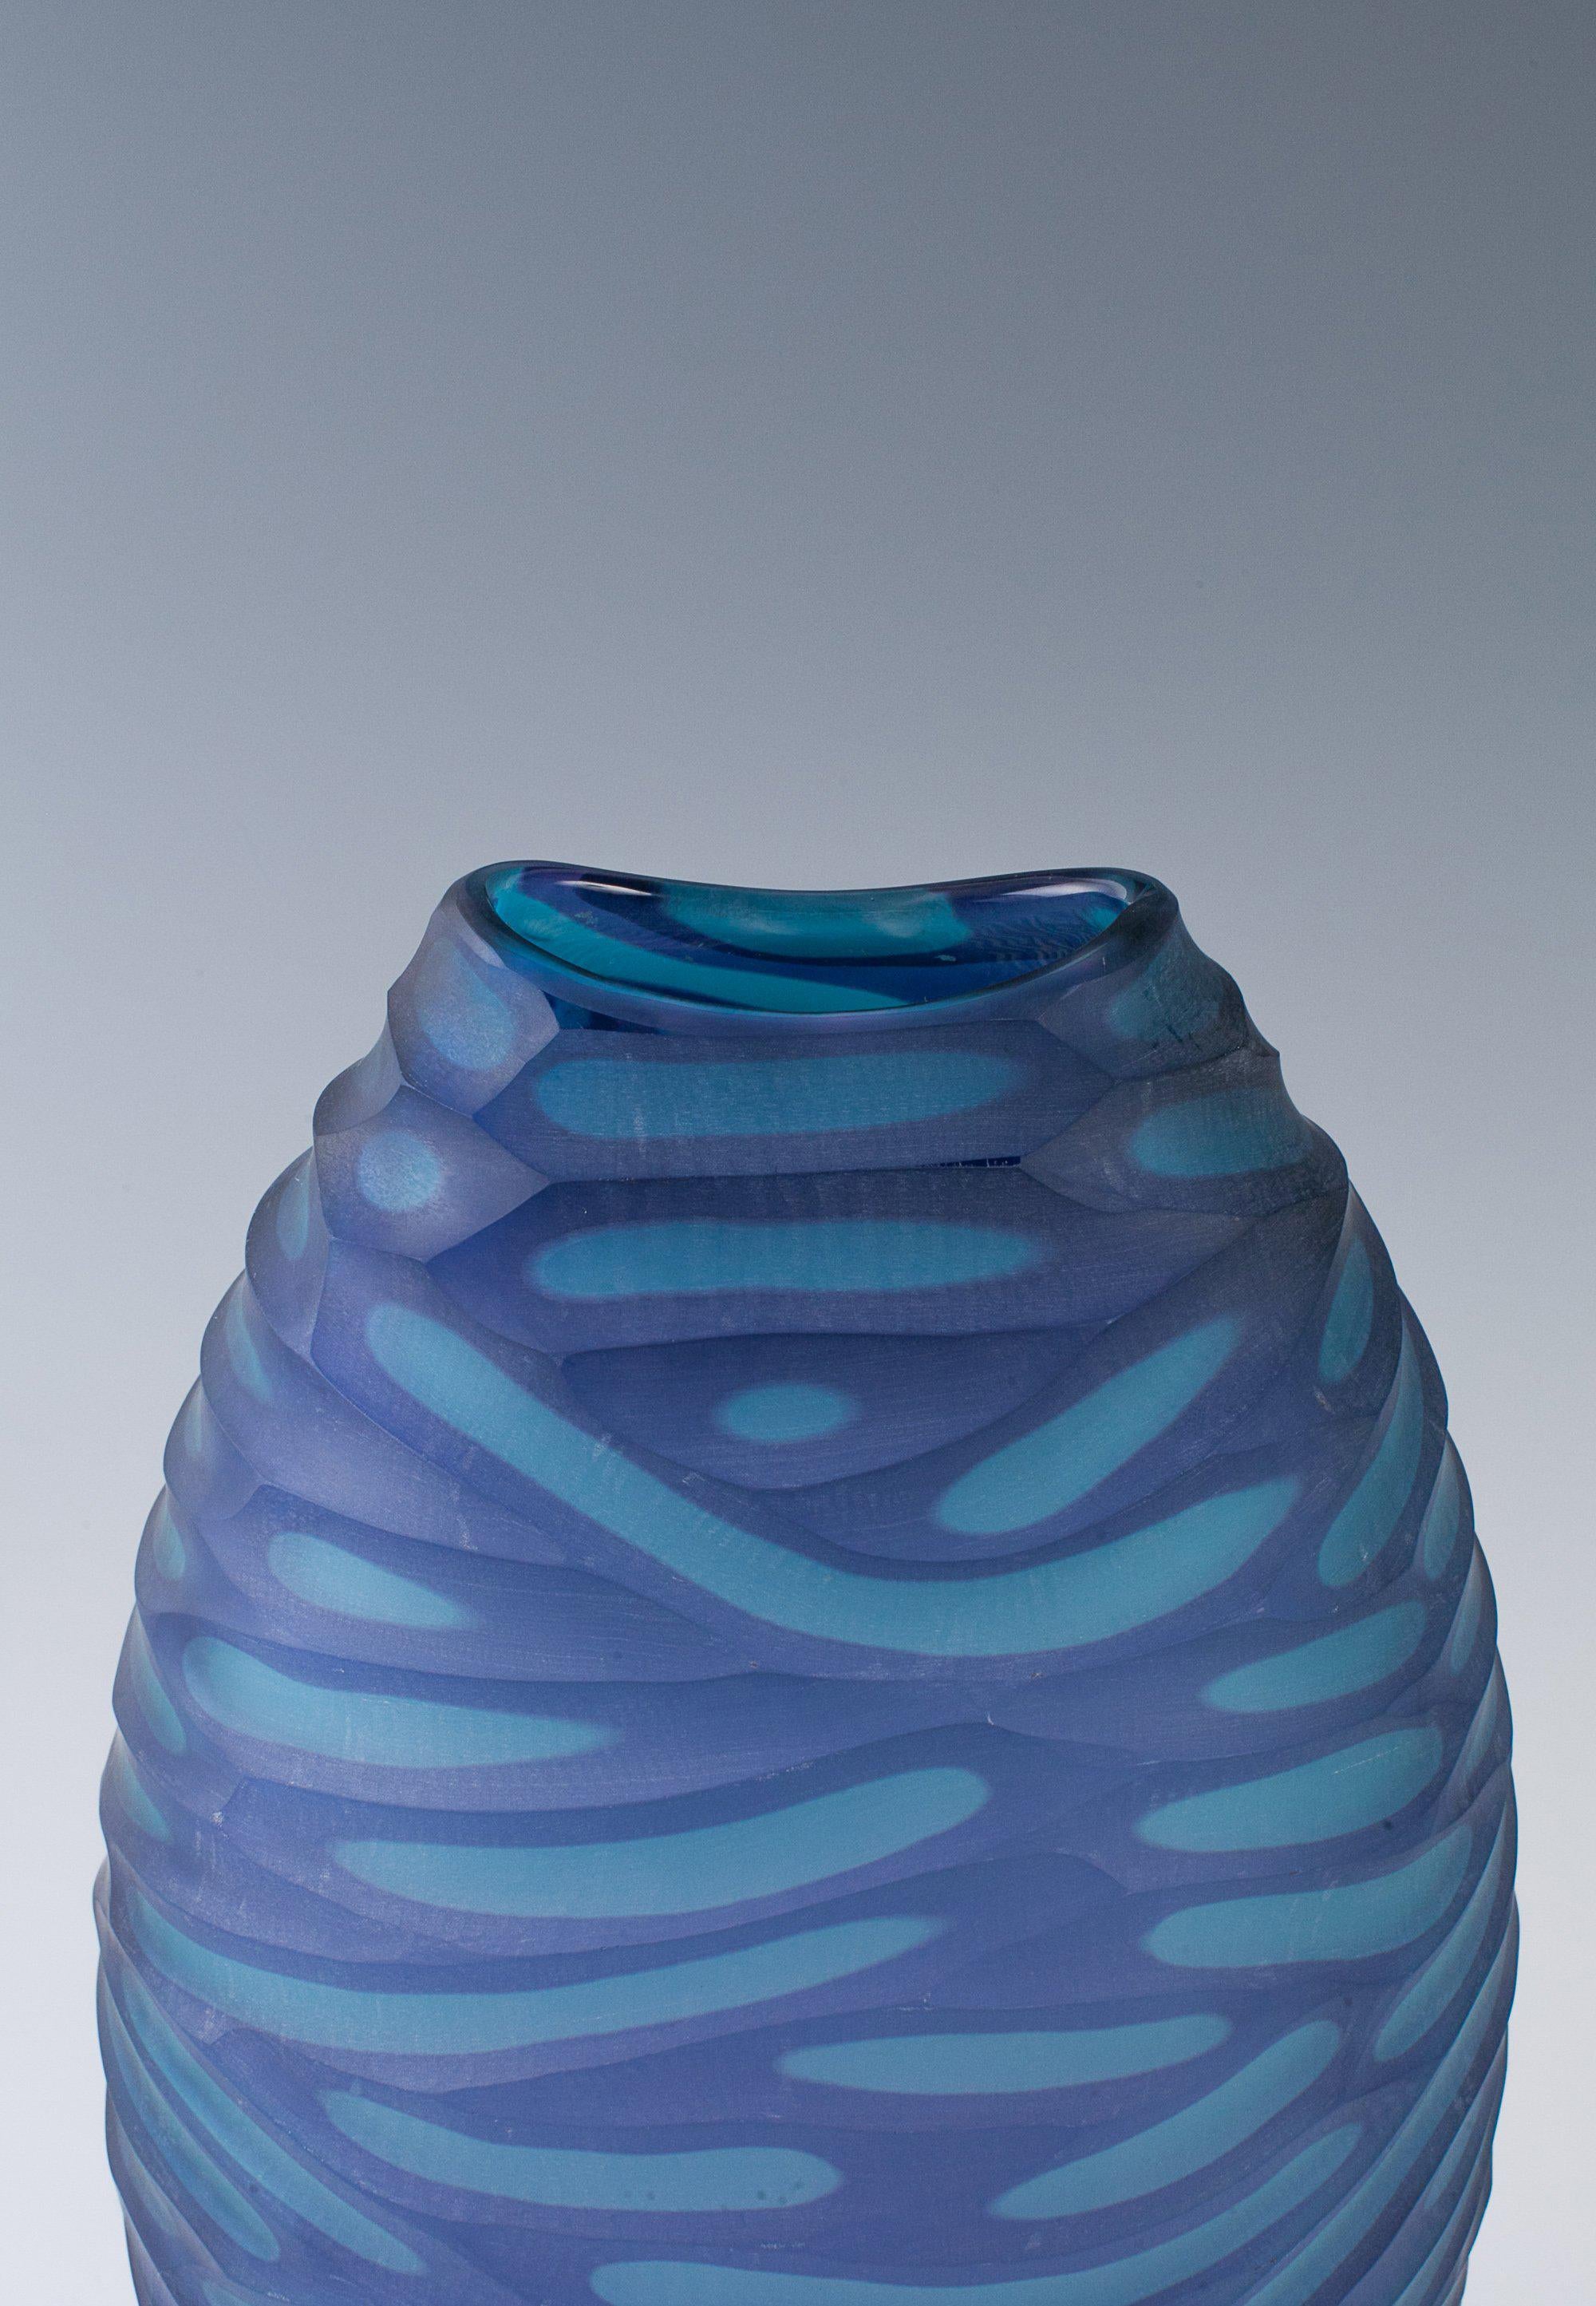 Philip Baldwin and Monica Guggisberg; Blown and carved glass vessel
Switzerland, 2005;
Signed, dated, titled and numbered;
Unique piece
Measures: High 43.5 cm
Excellent condition.